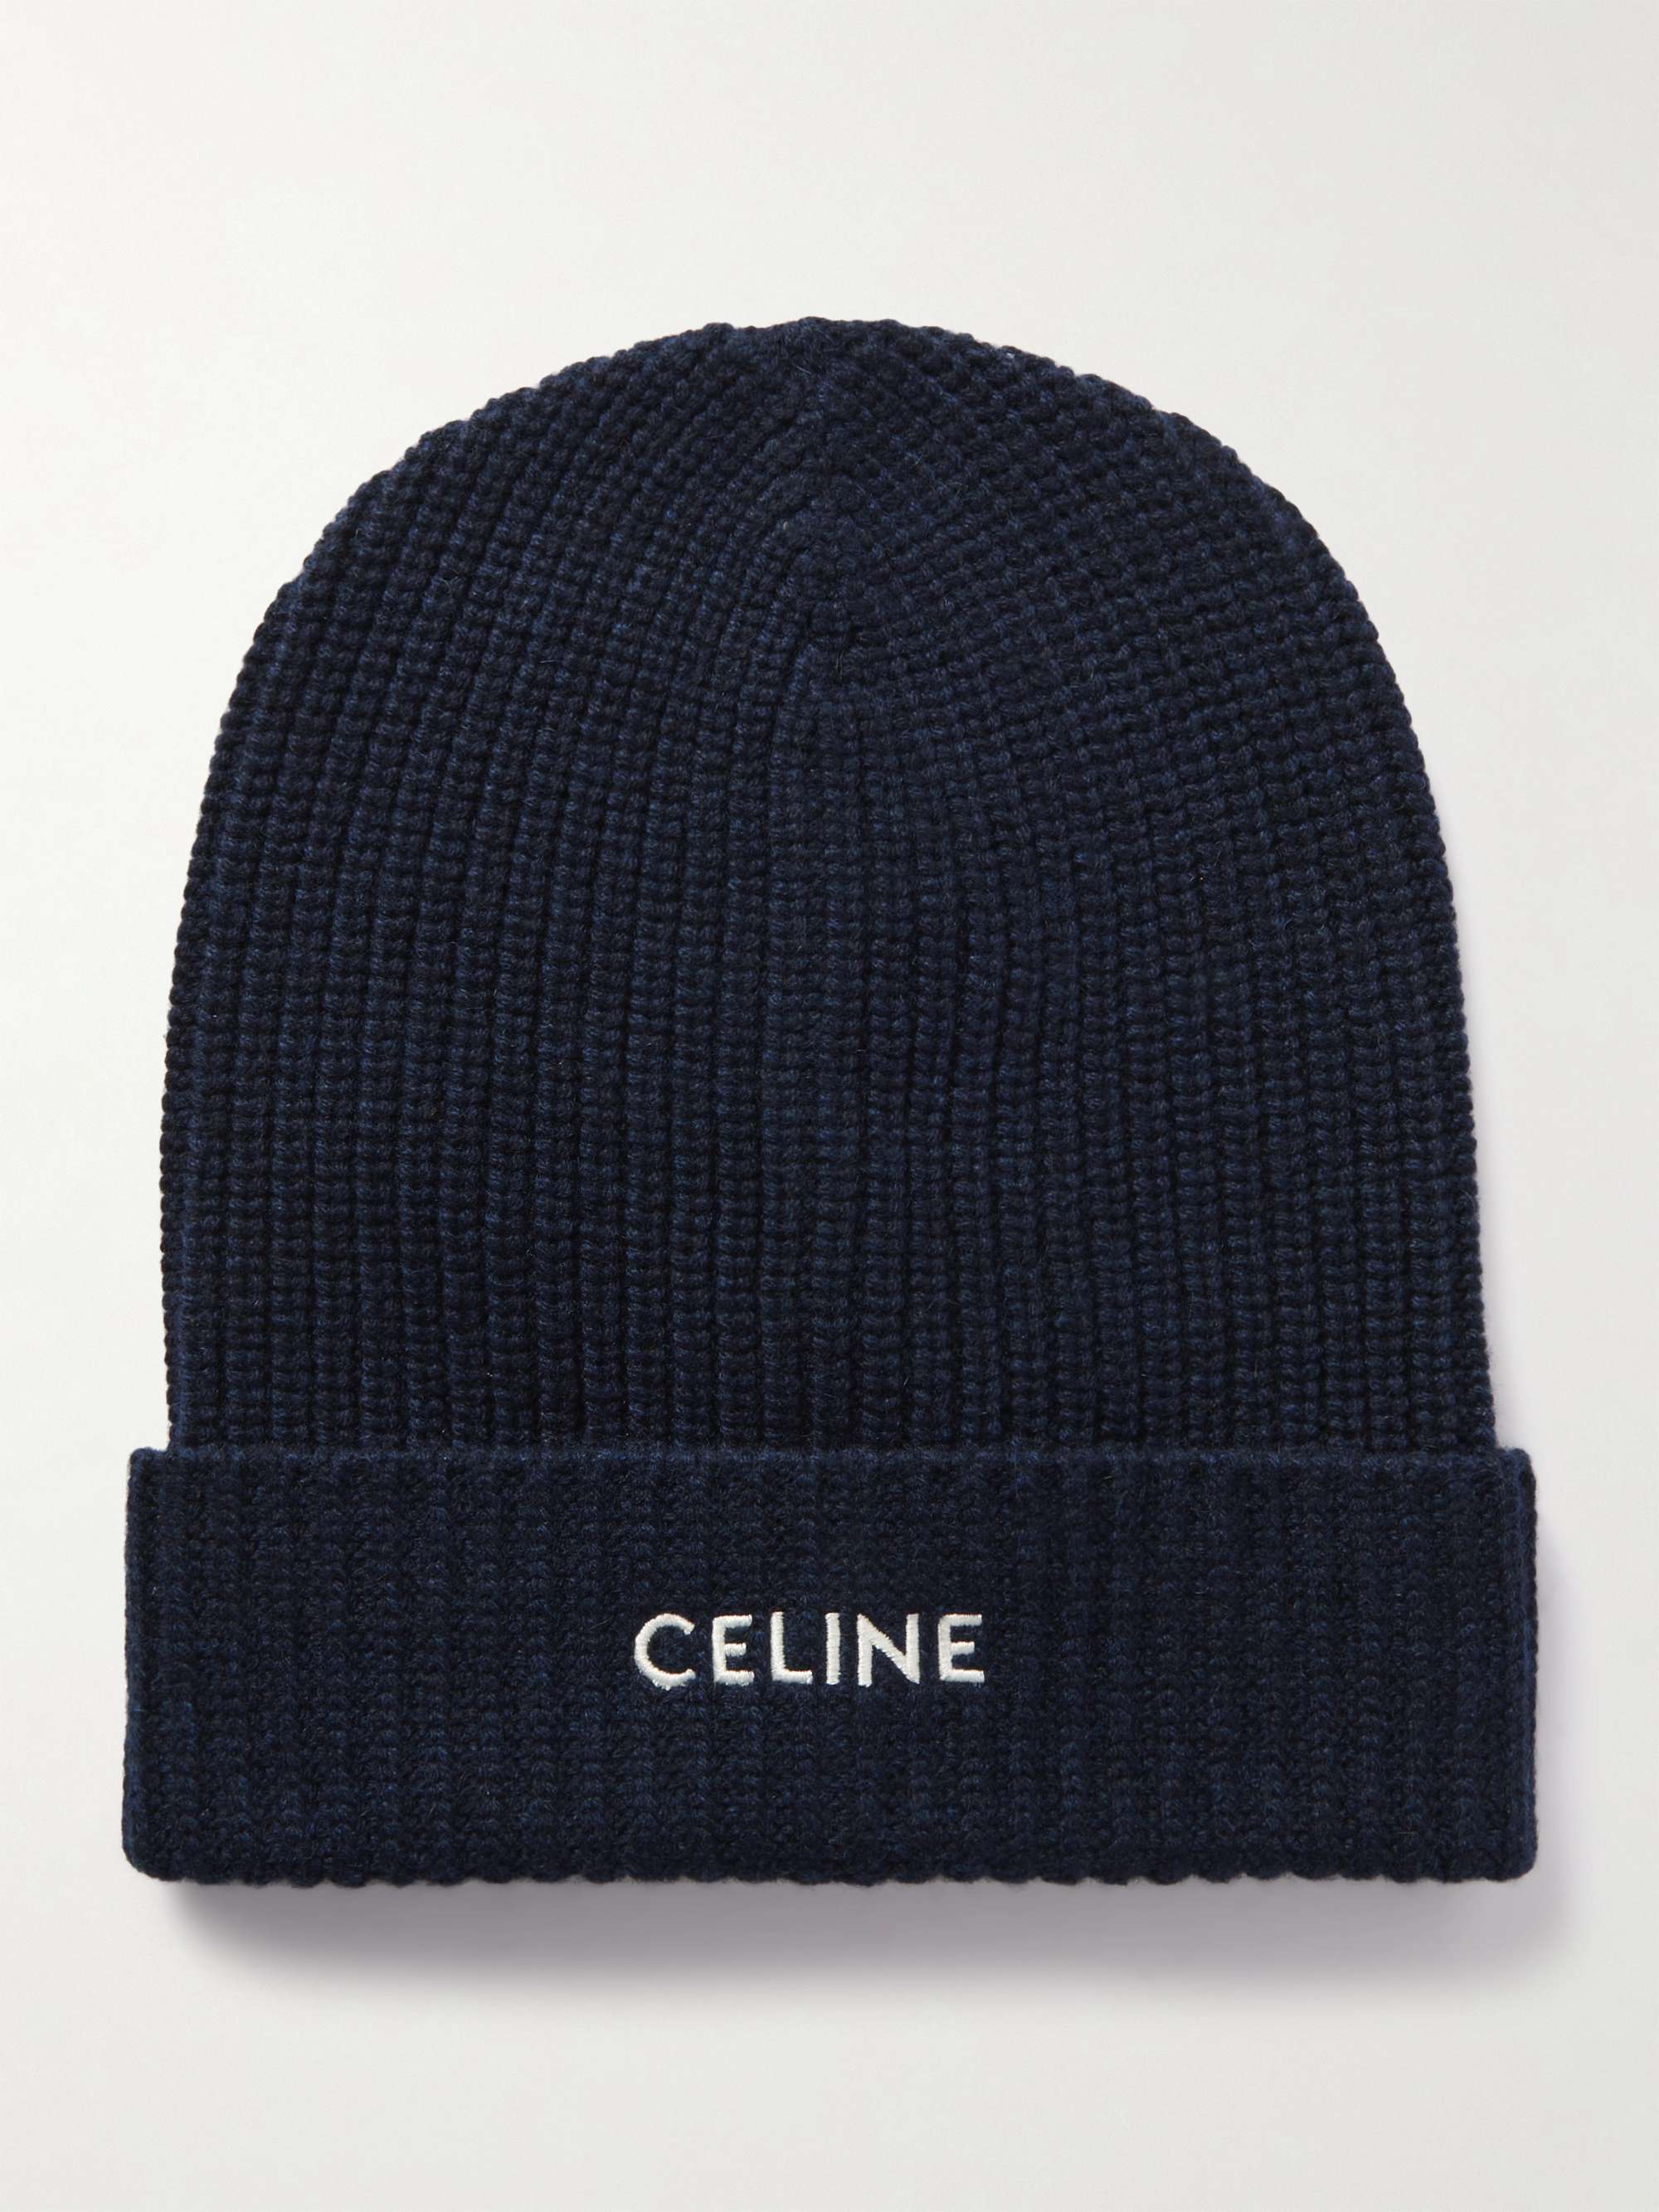 CELINE HOMME Logo-Embroidered Ribbed Cashmere Beanie